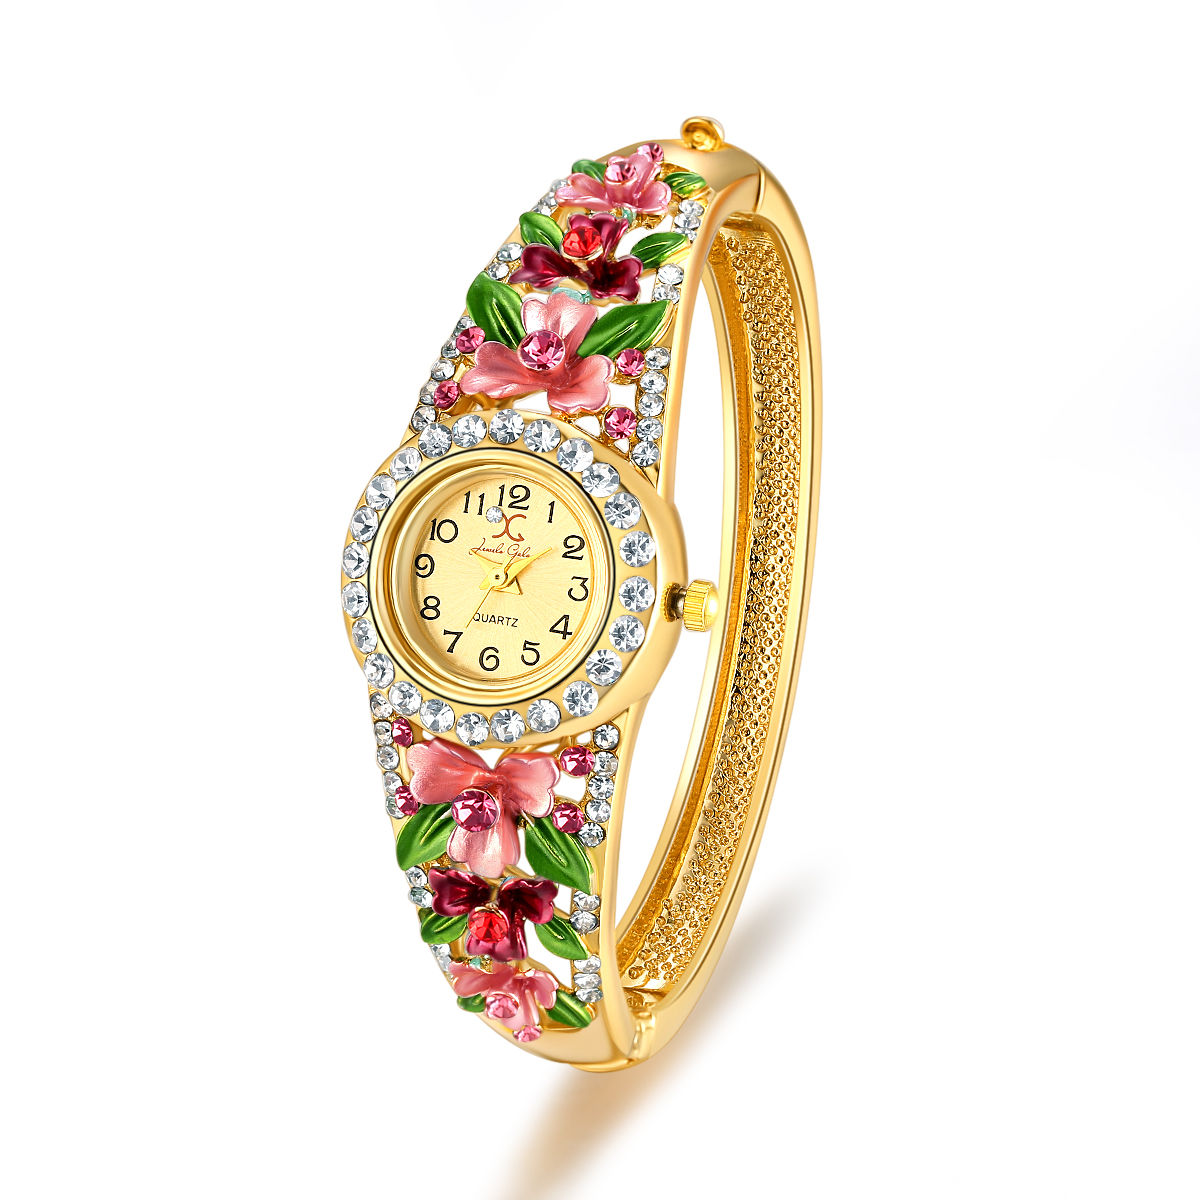 Antique Bracelet Watches: What You Want to Look For | LoveToKnow